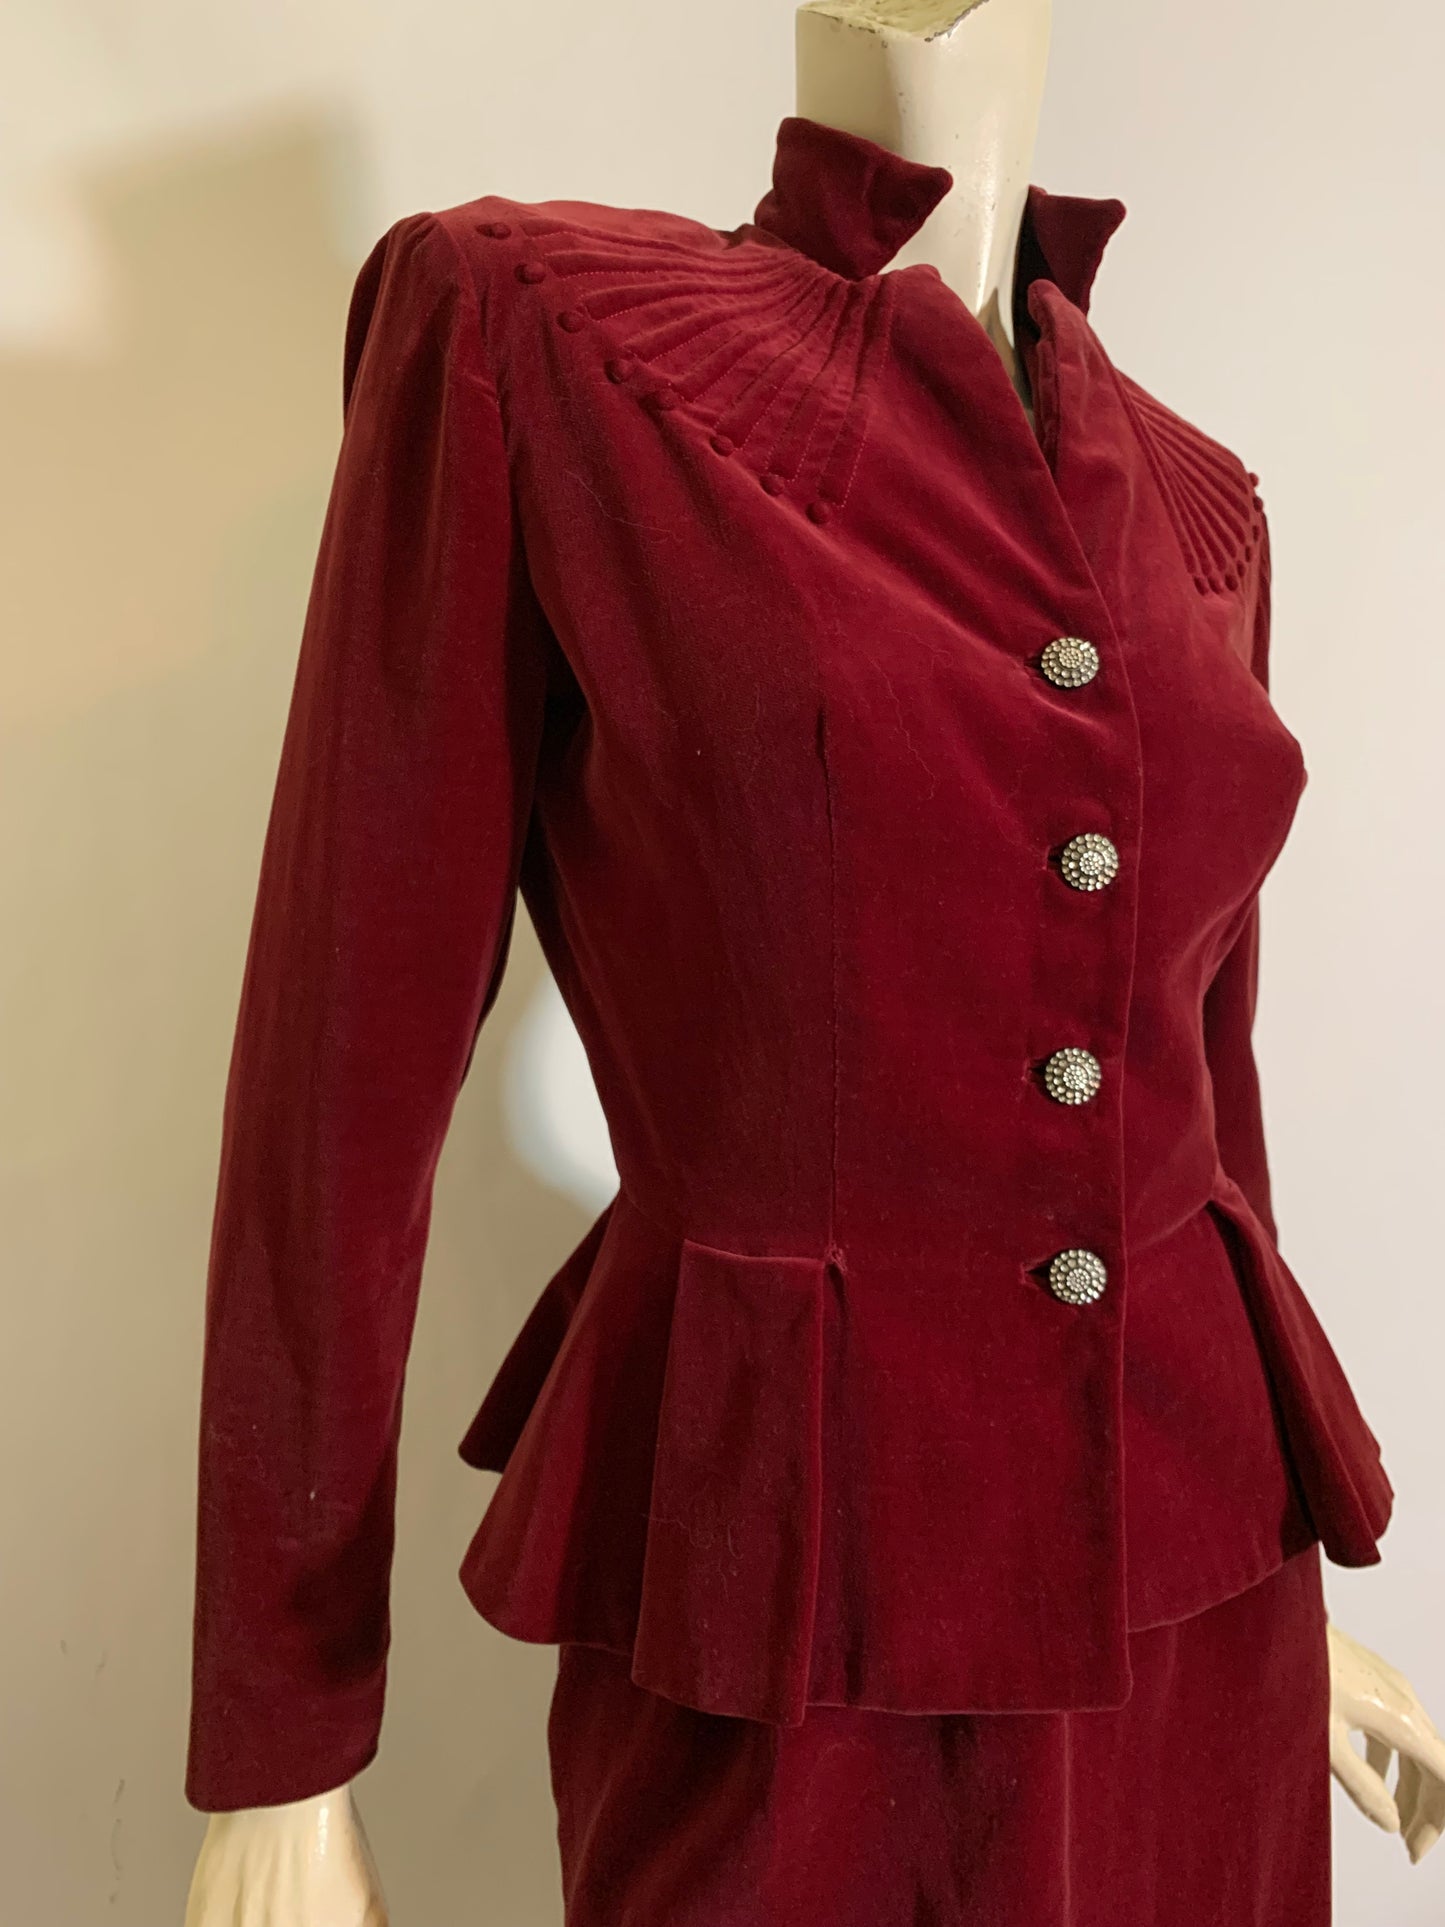 Plum Red Velvet Nipped Waist Suit with Trapunto Detailed Shoulders circa 1940s